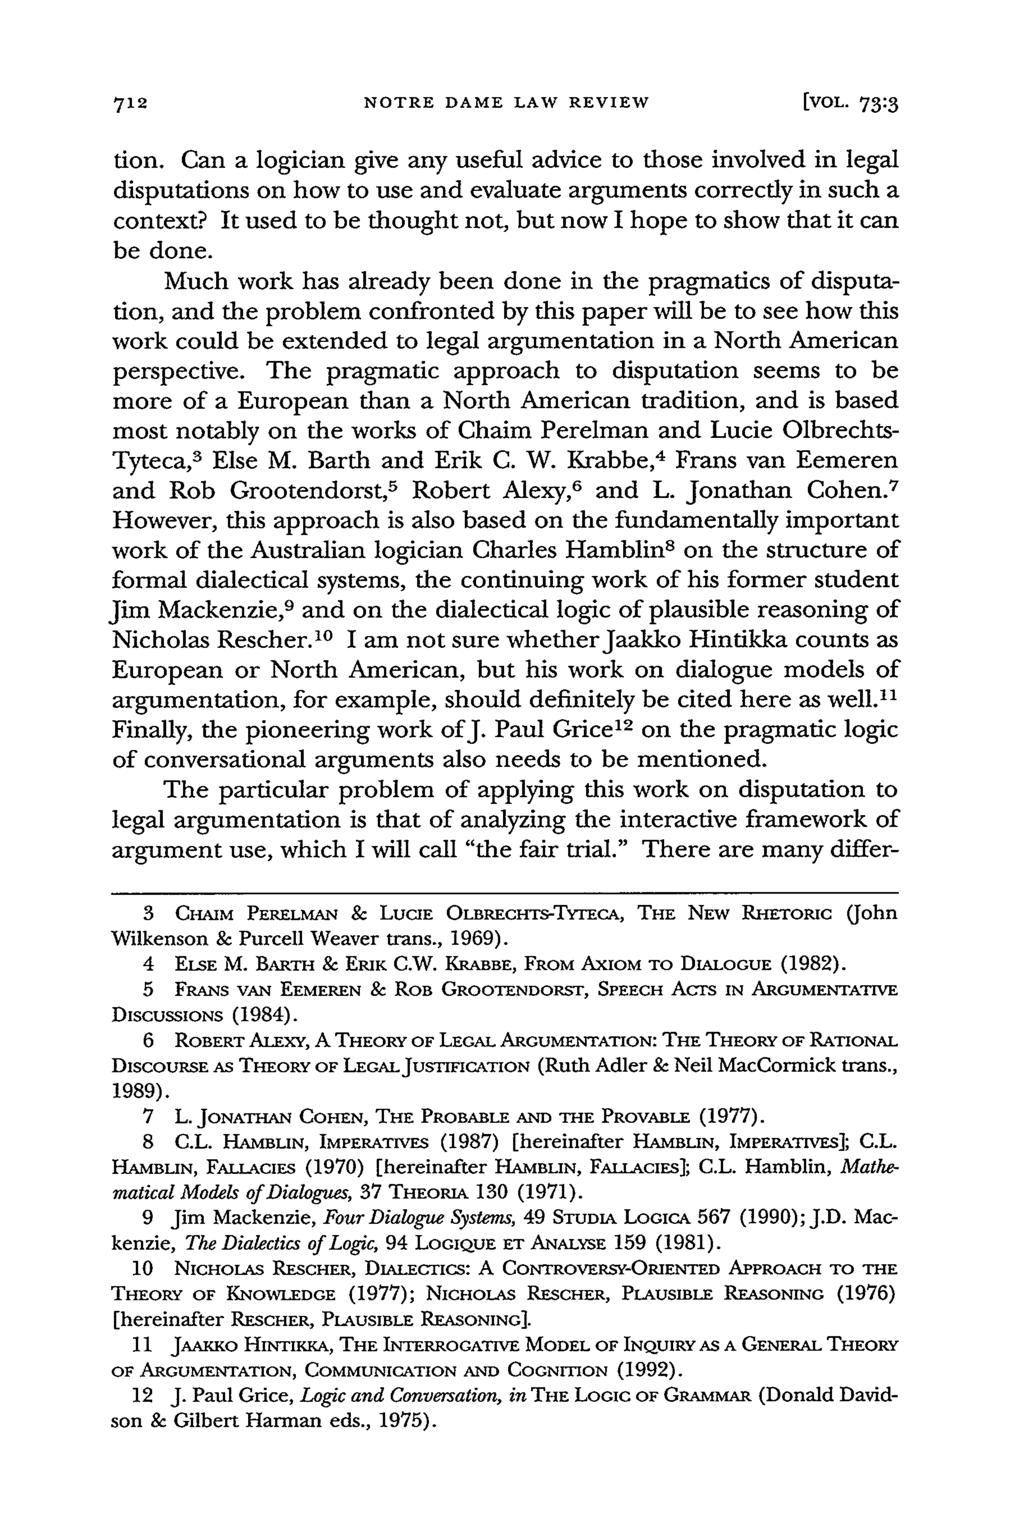 NOTRE DAME LAW REVIEW[ [VOL. 73:3 don. Can a logician give any useful advice to those involved in legal disputations on how to use and evaluate arguments correctly in such a context?